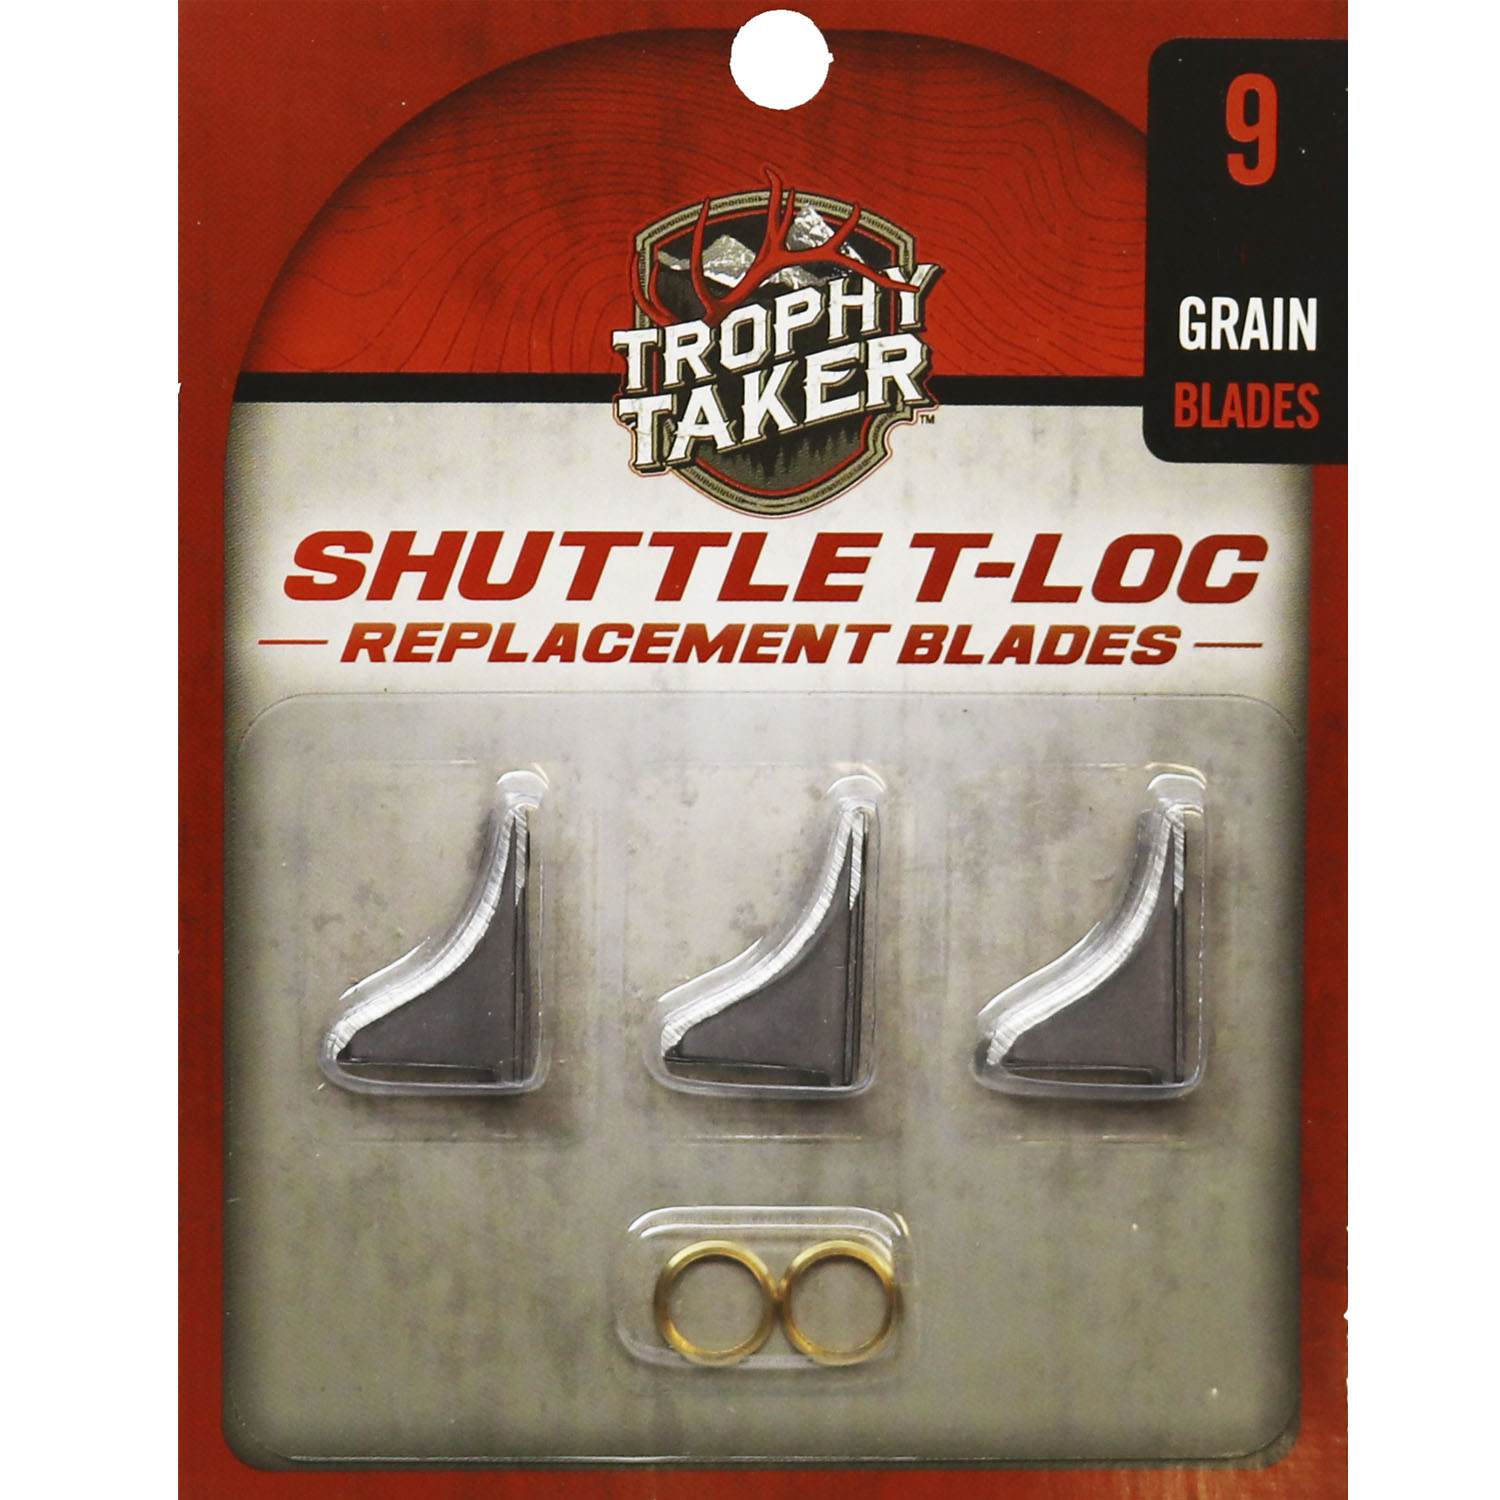 Trophy Taker Shuttle T CNC 100gr Replacement Blades Broadheads T7013 for sale online 